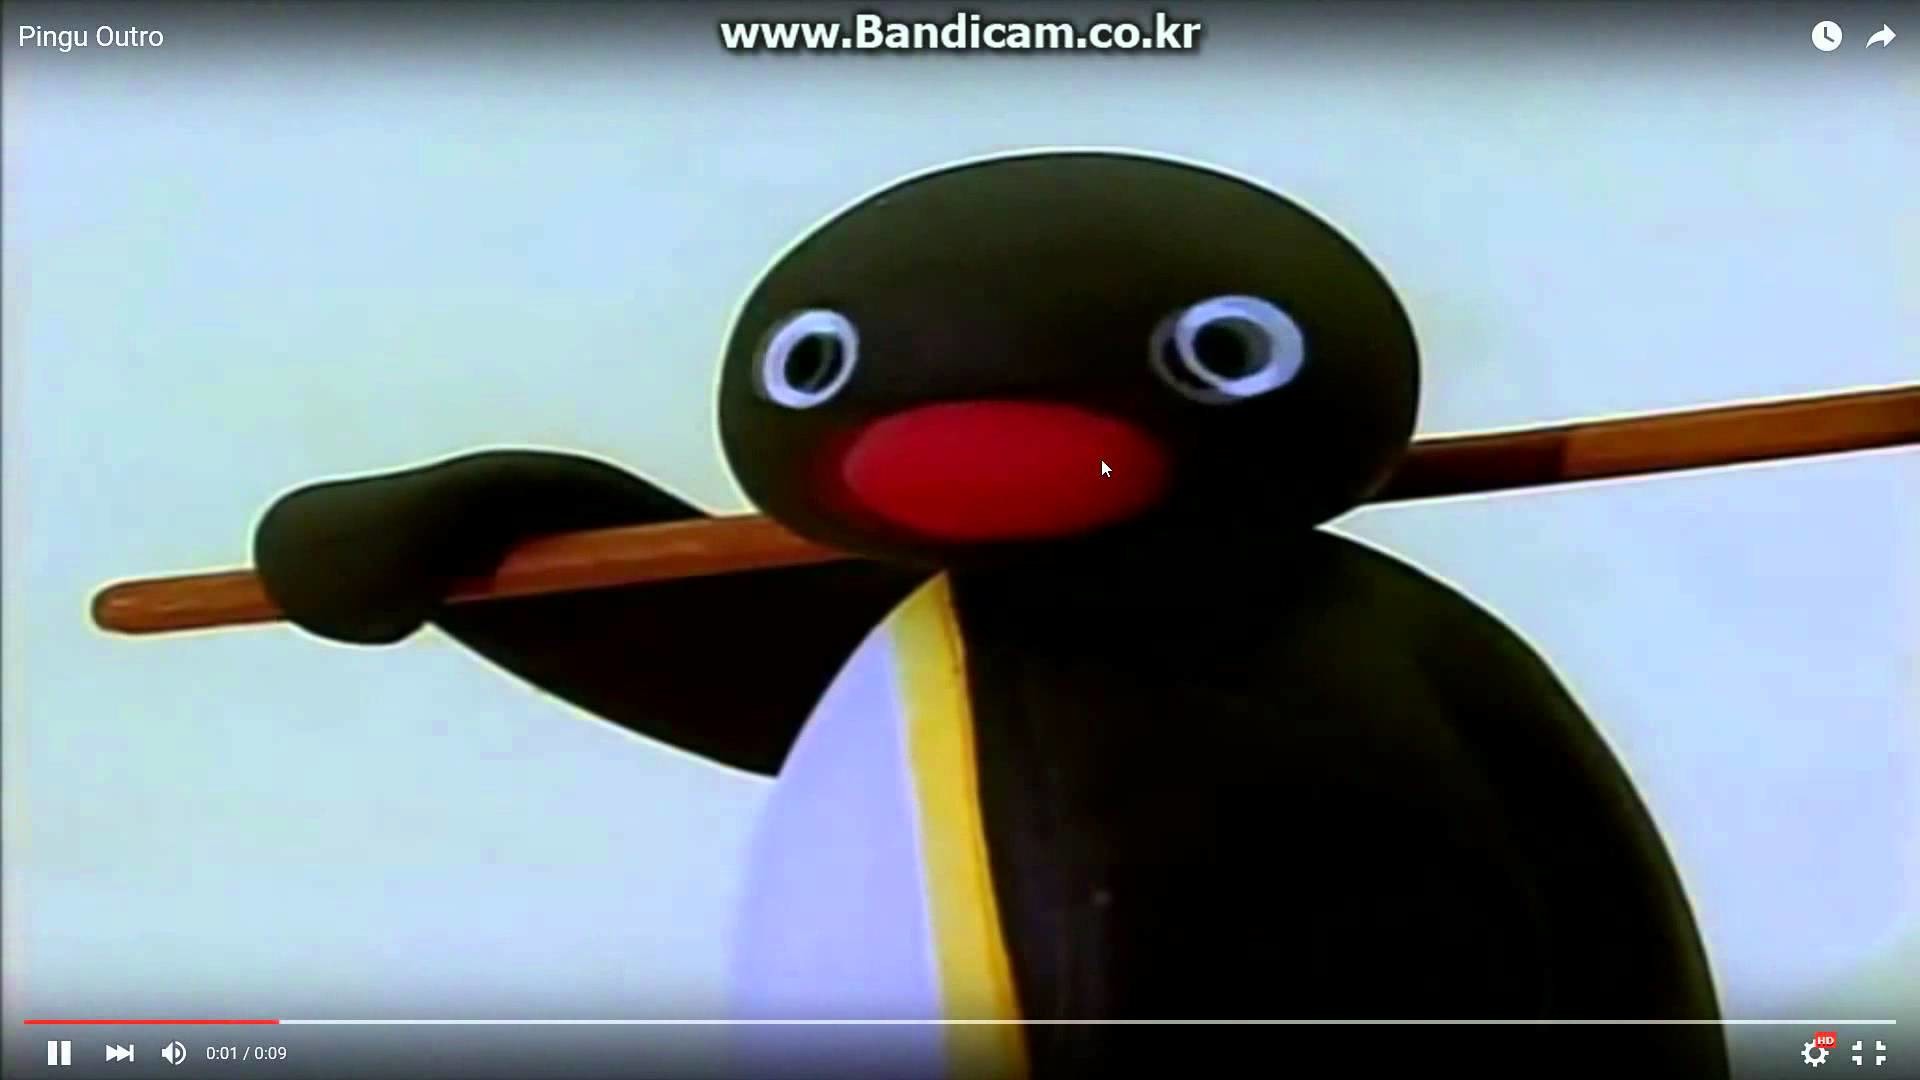 1920x1080 Pingu outro is slowing down!!!